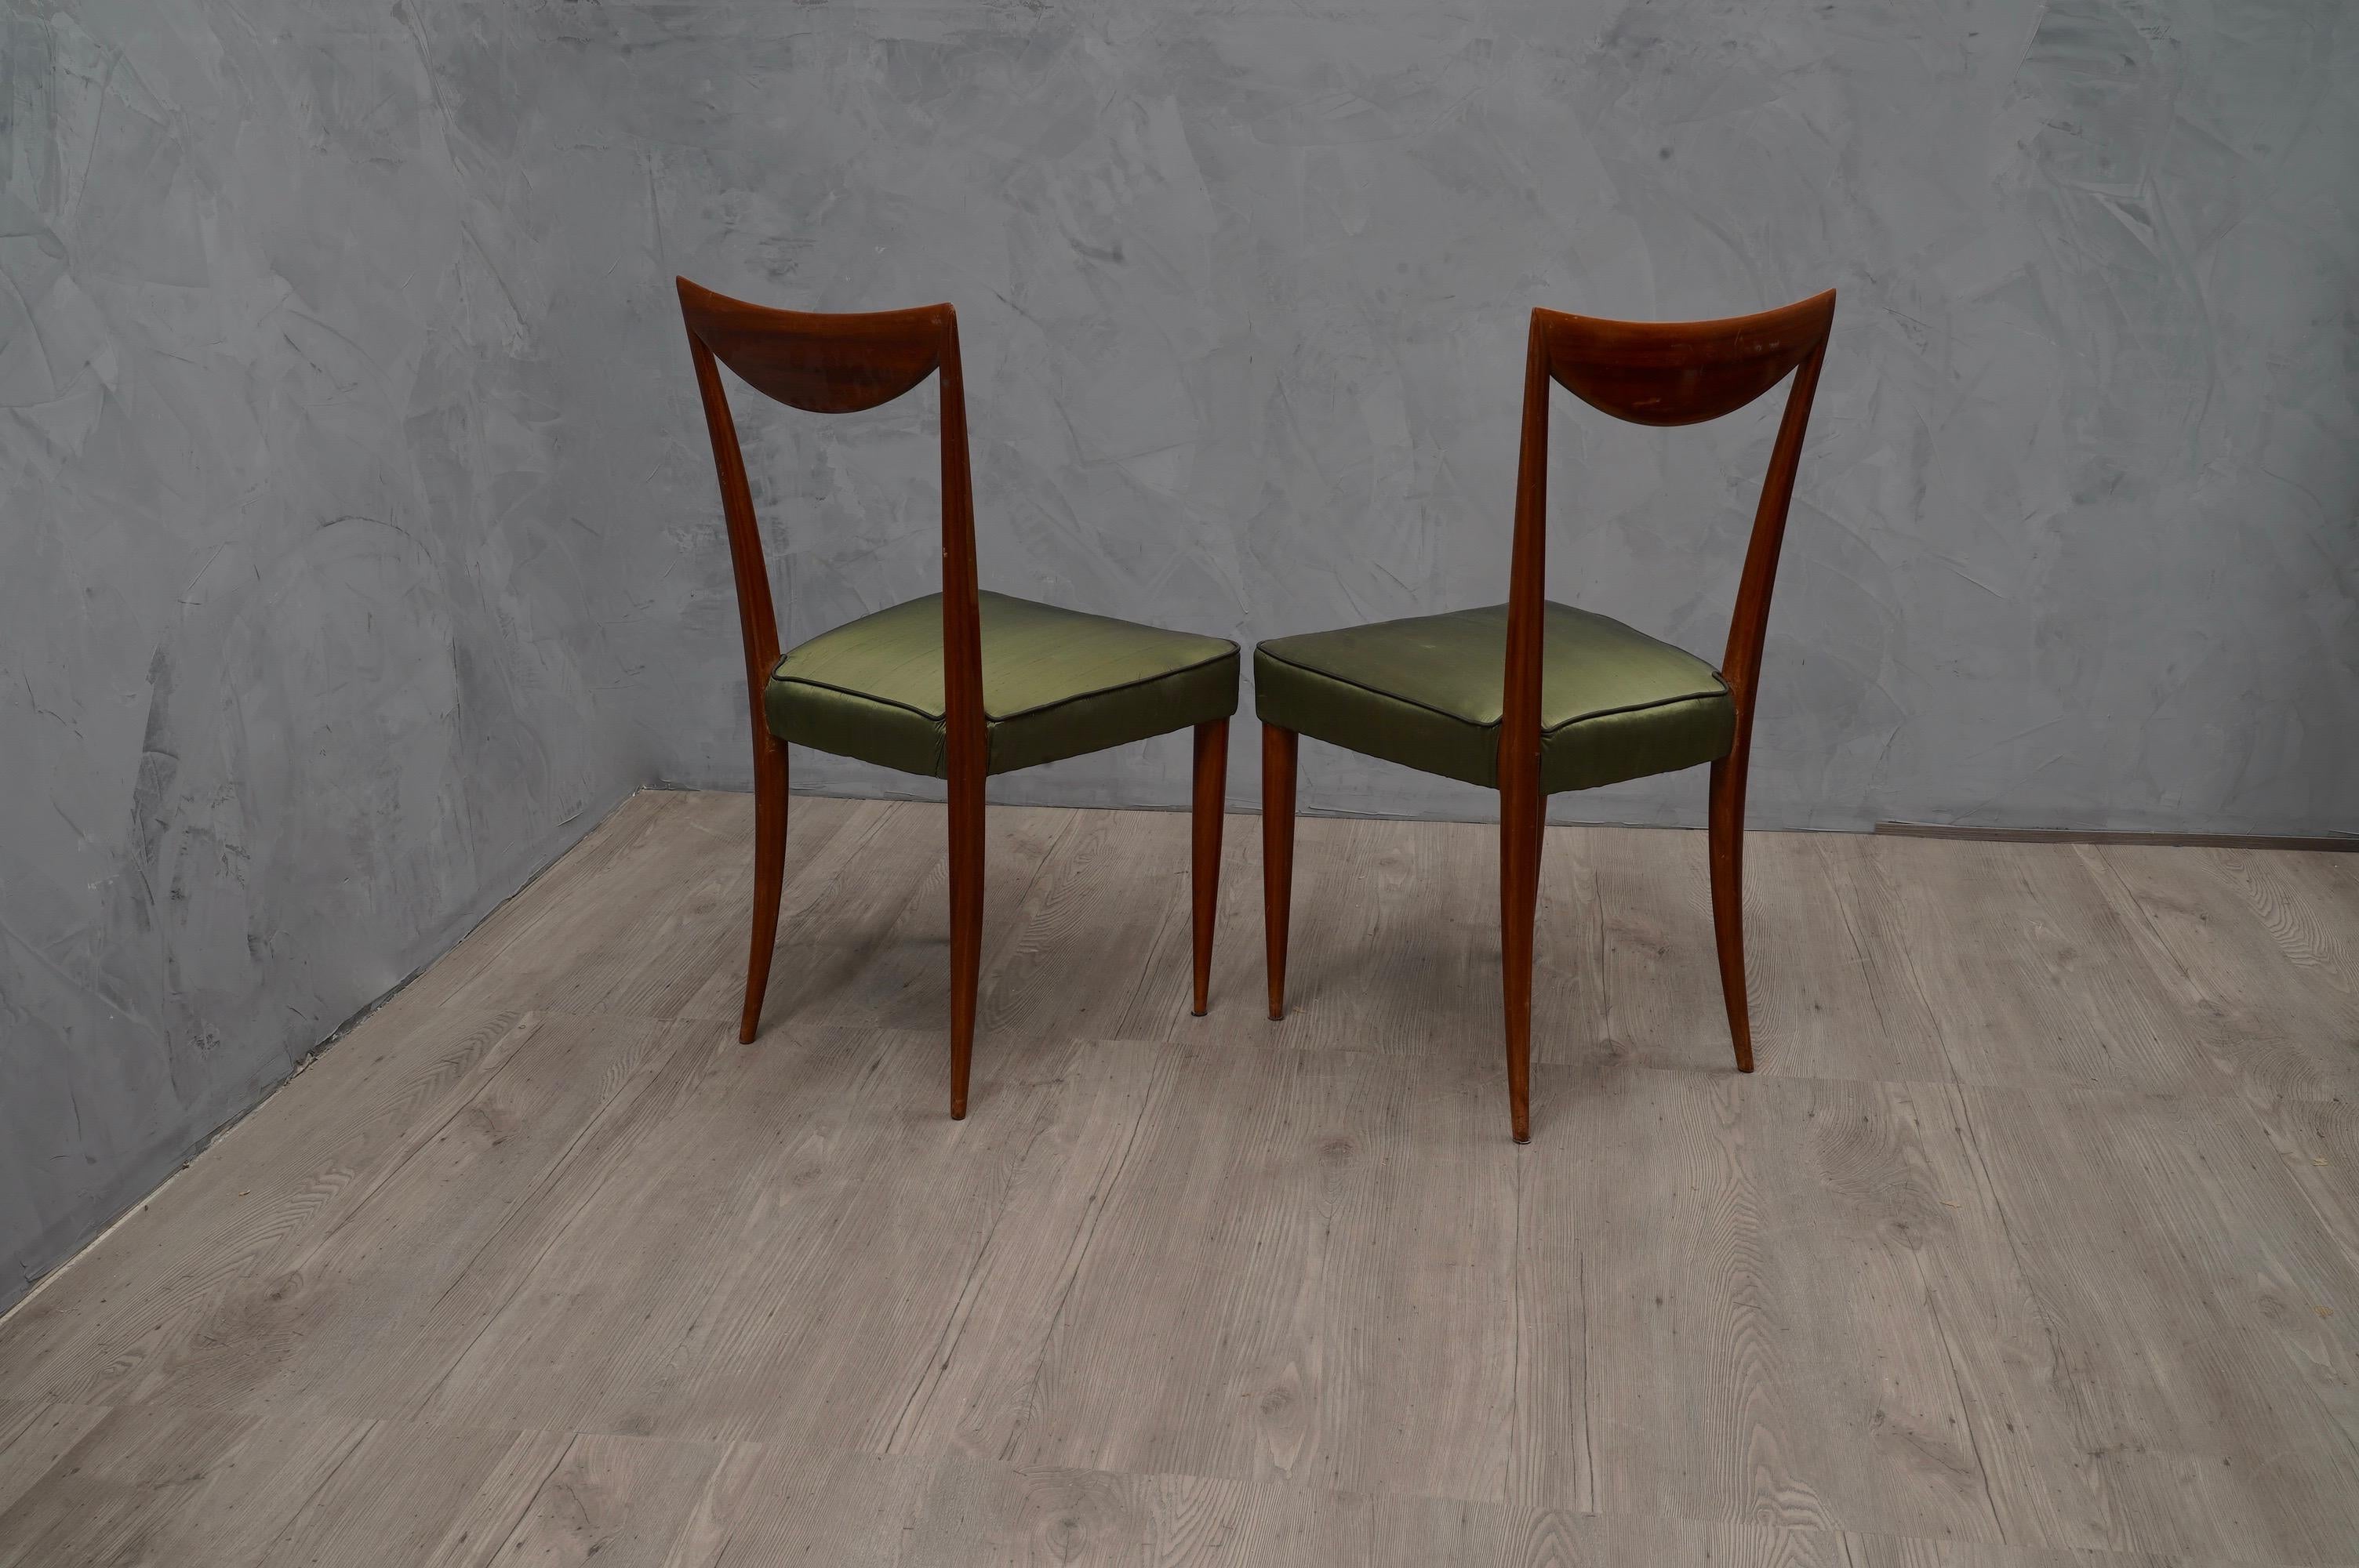 Pair of Italian chairs from 1950. Fine materials, mahogany wood and green silk, in characteristic Italian style of Paolo Buffa, as we can see from the type of backrest, slightly curved backwards, and from the typical cuttlefish bone shape.

All in